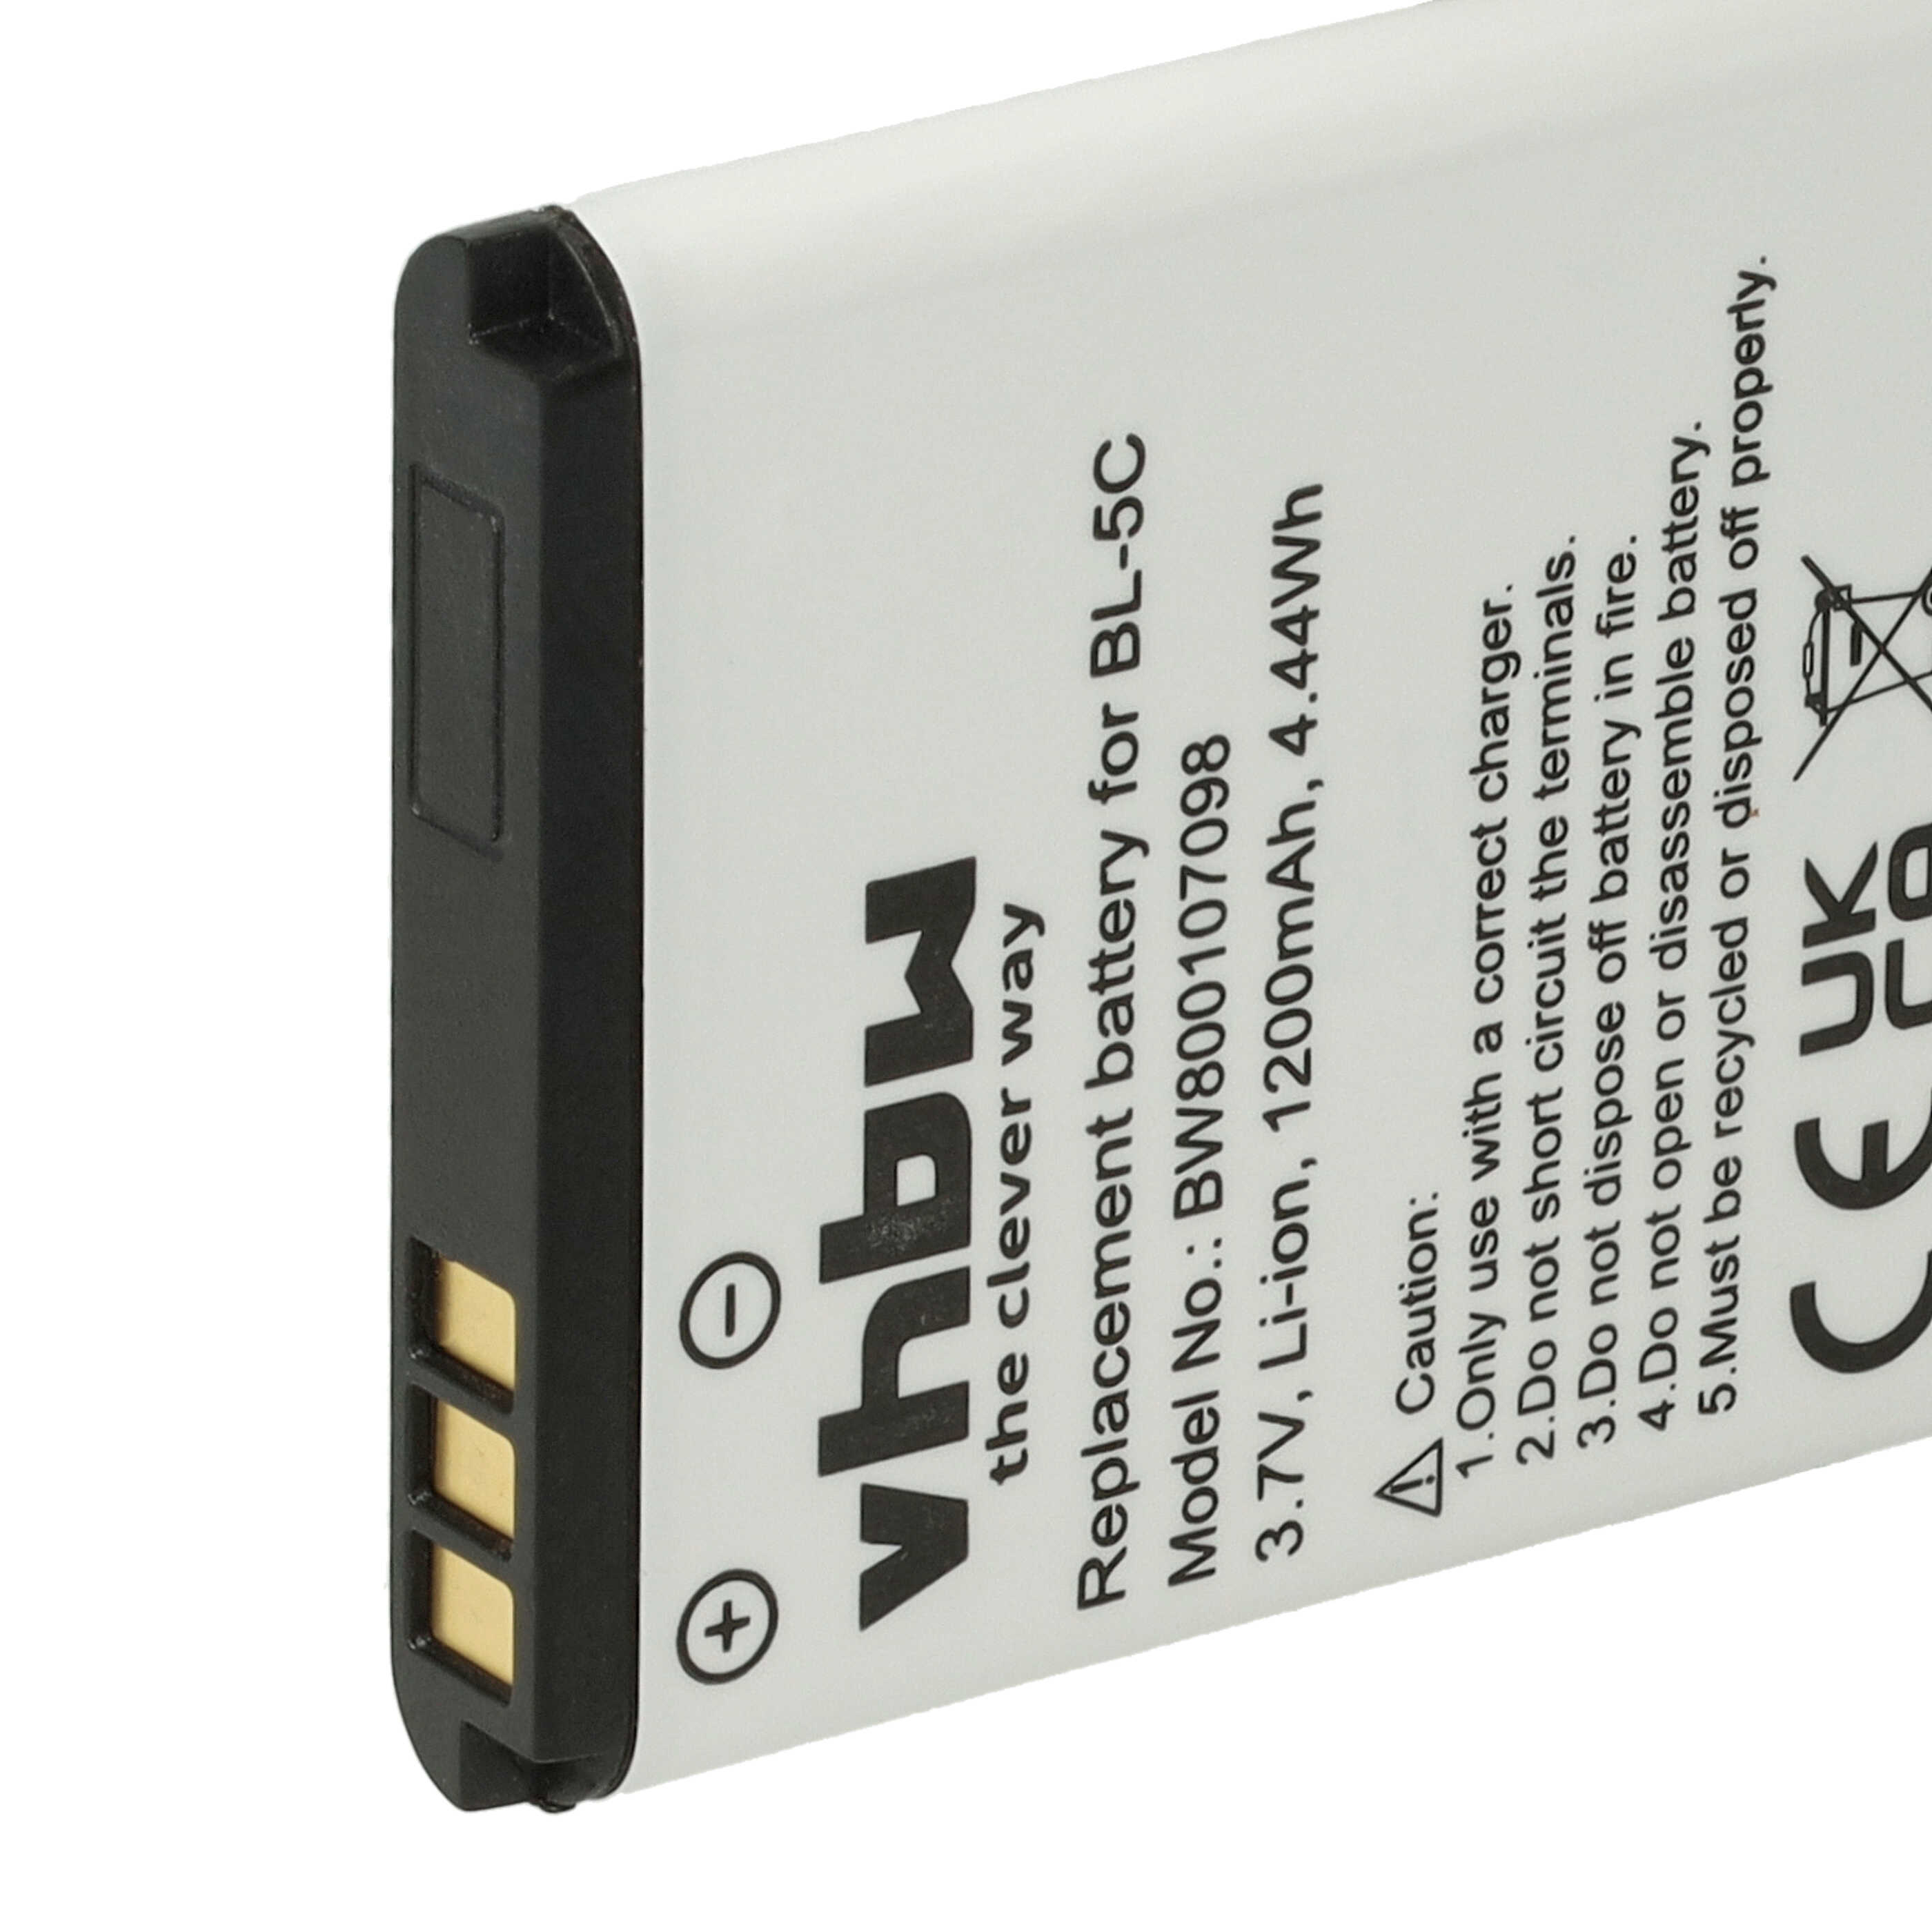 Mobile Phone Battery Replacement for Wiko Lubi2 - 1200mAh 3.7V Li-Ion